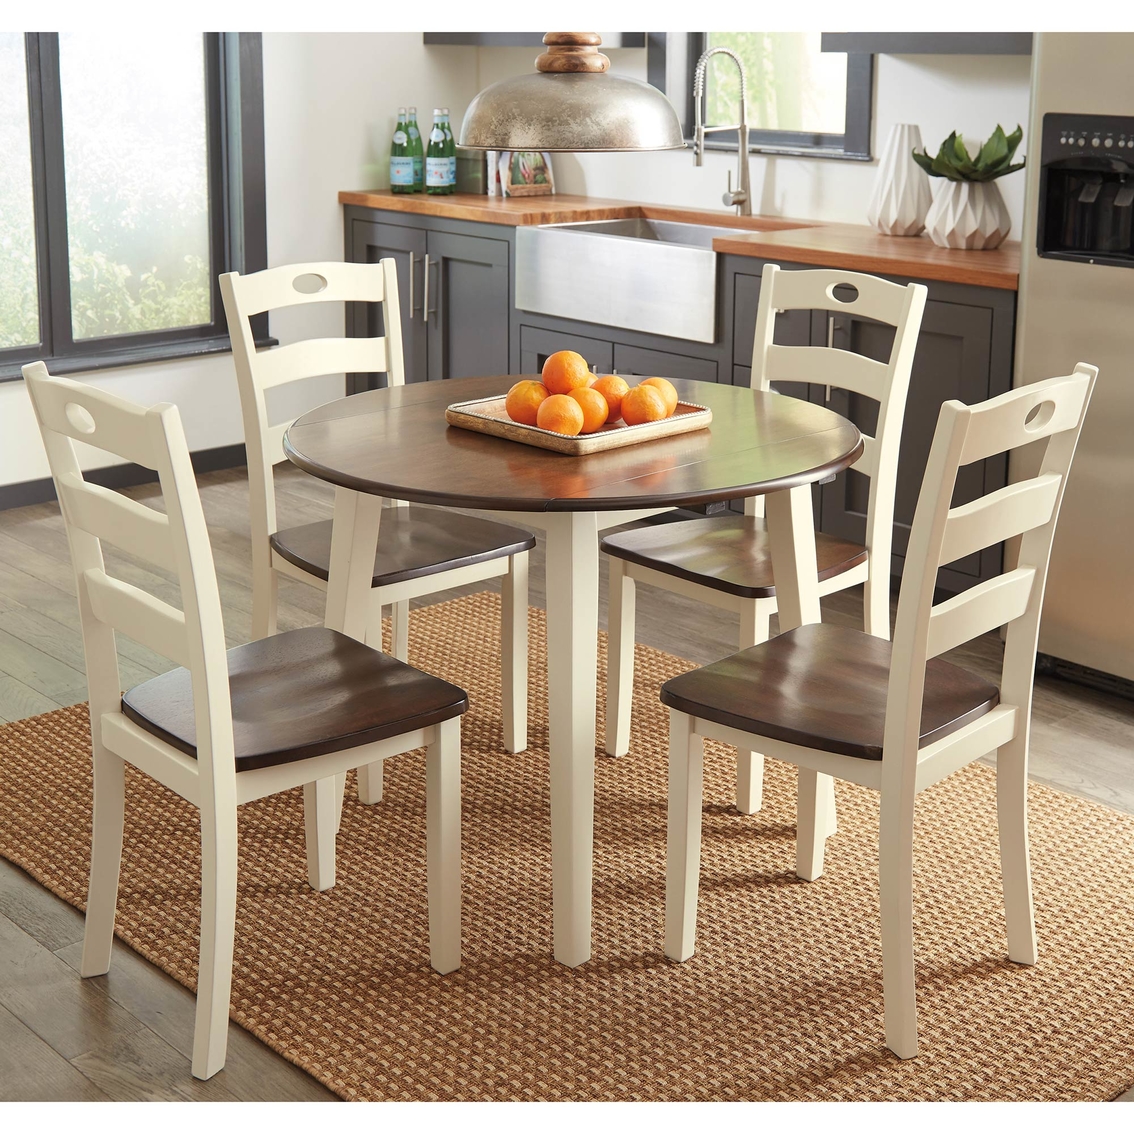 Ashley Woodanville Drop Leaf Table and Four Chairs Set - Image 4 of 4